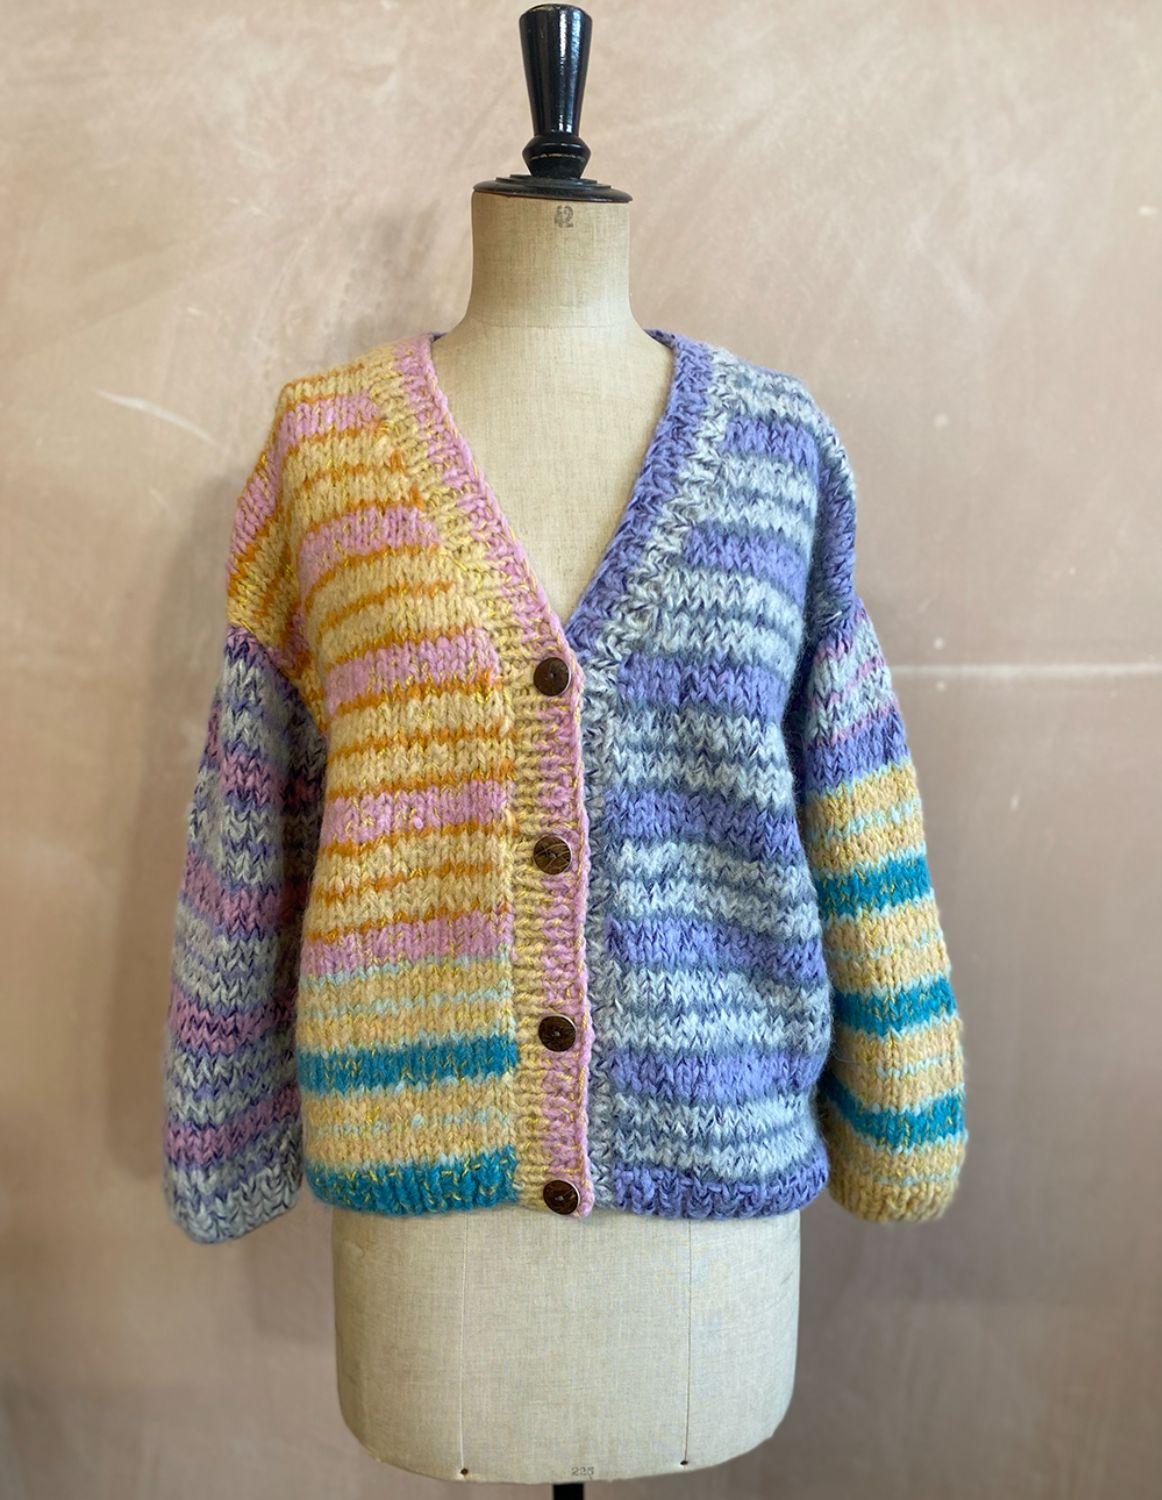 Striped Alpaca Cardigan in Buttermilk with a pastel pink